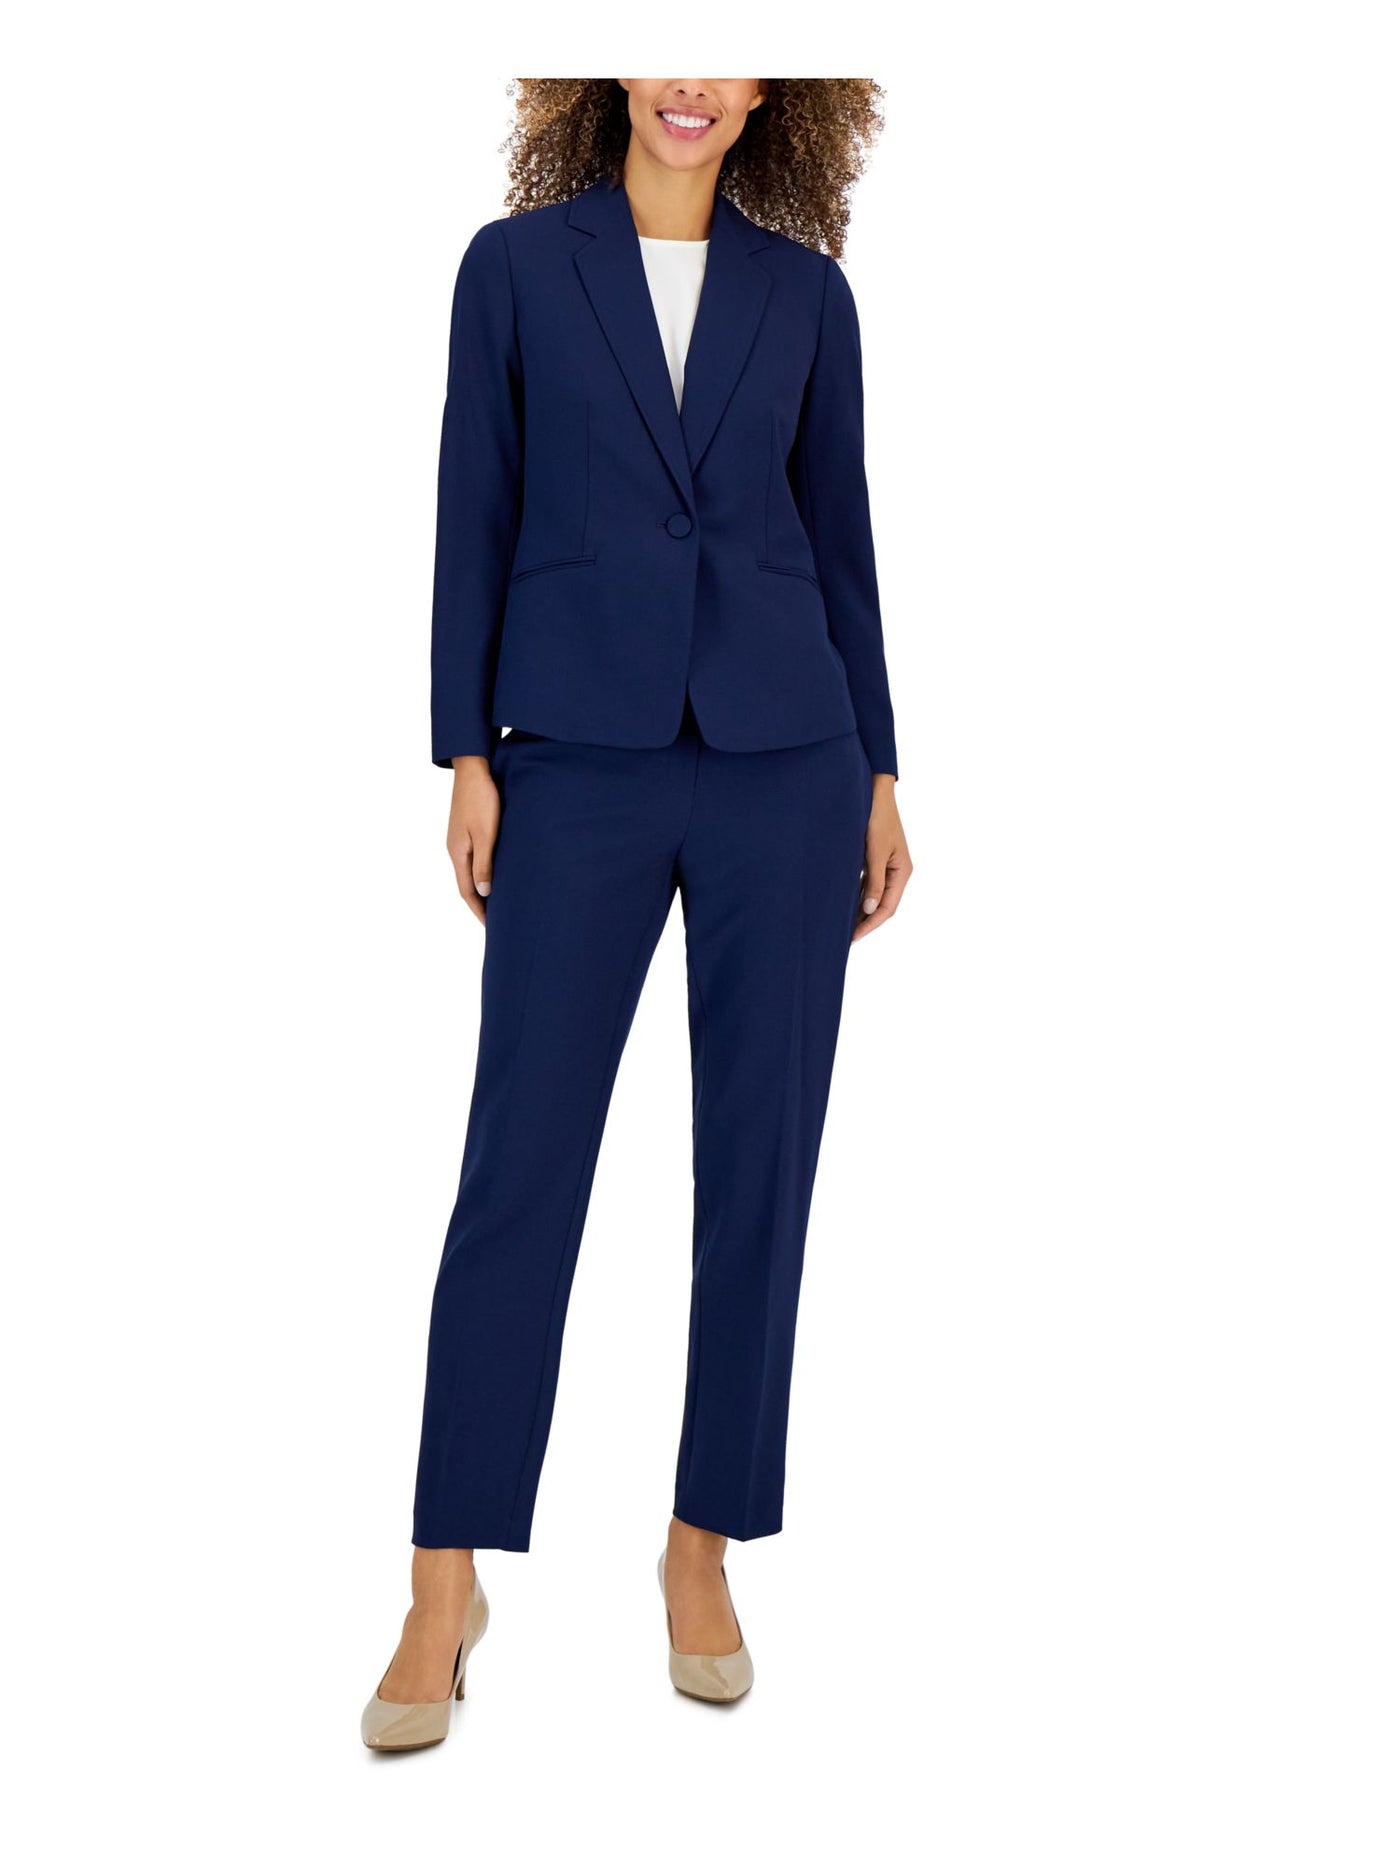 LE SUIT Womens Navy Pocketed Zippered Hook And Bar Closure Wear To Work Straight leg Pants 14P